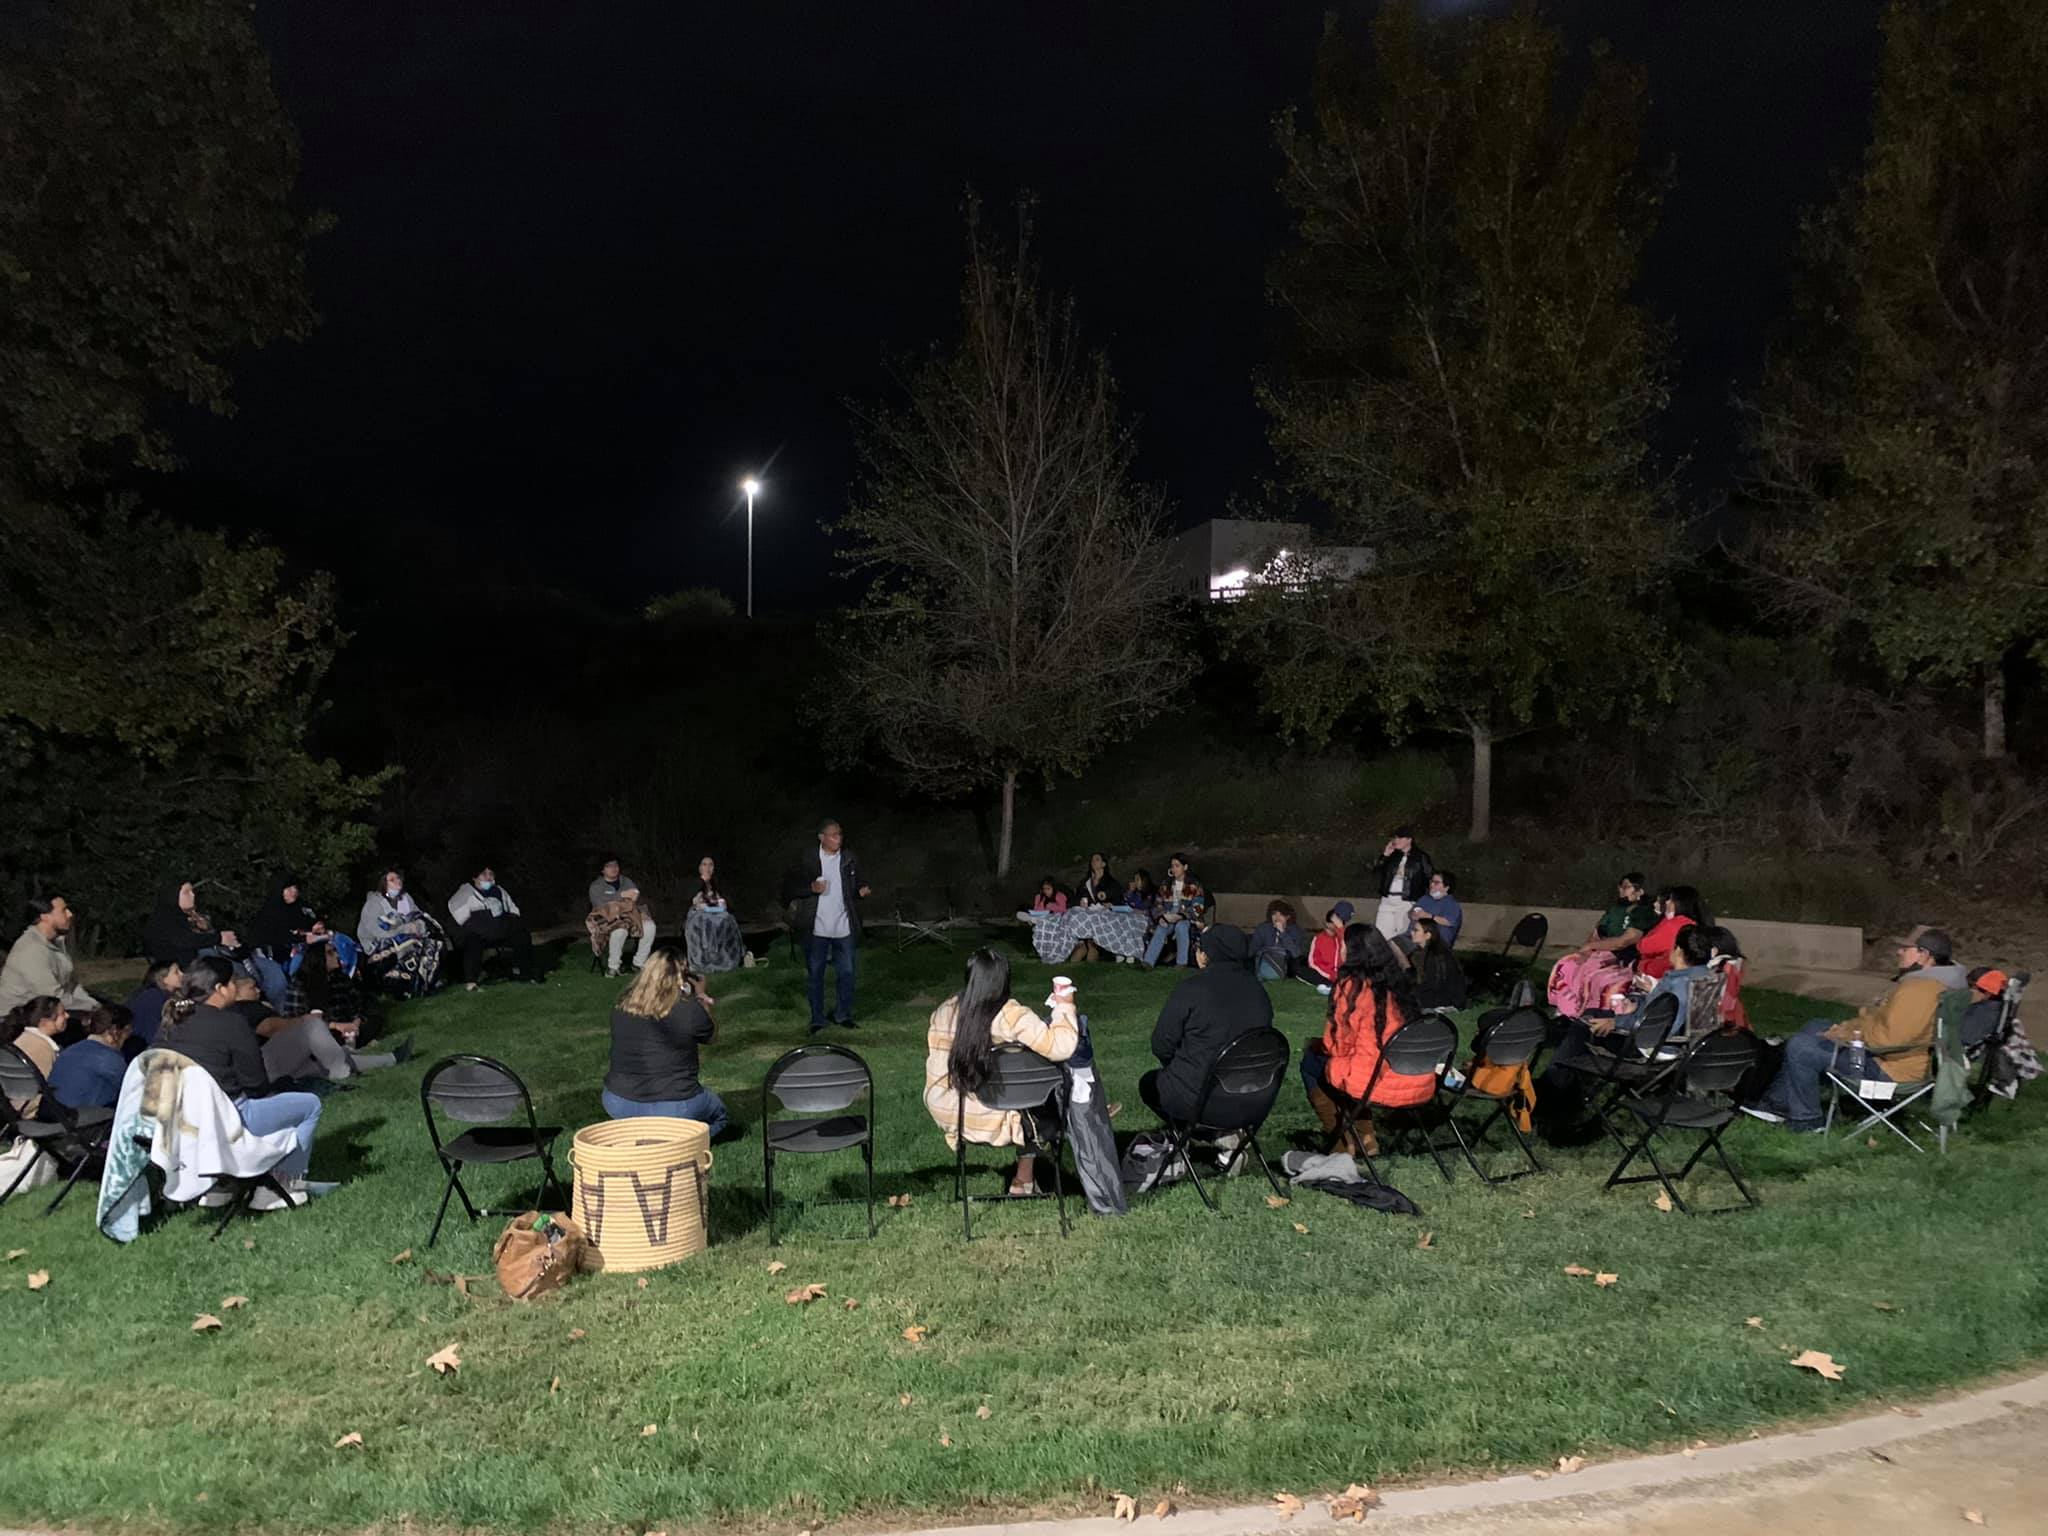 People sitting in a circle of black folding chairs placed on the grass around Dr. Stan Rodriguez as he stands in the center of the circle against the black nighttime sky